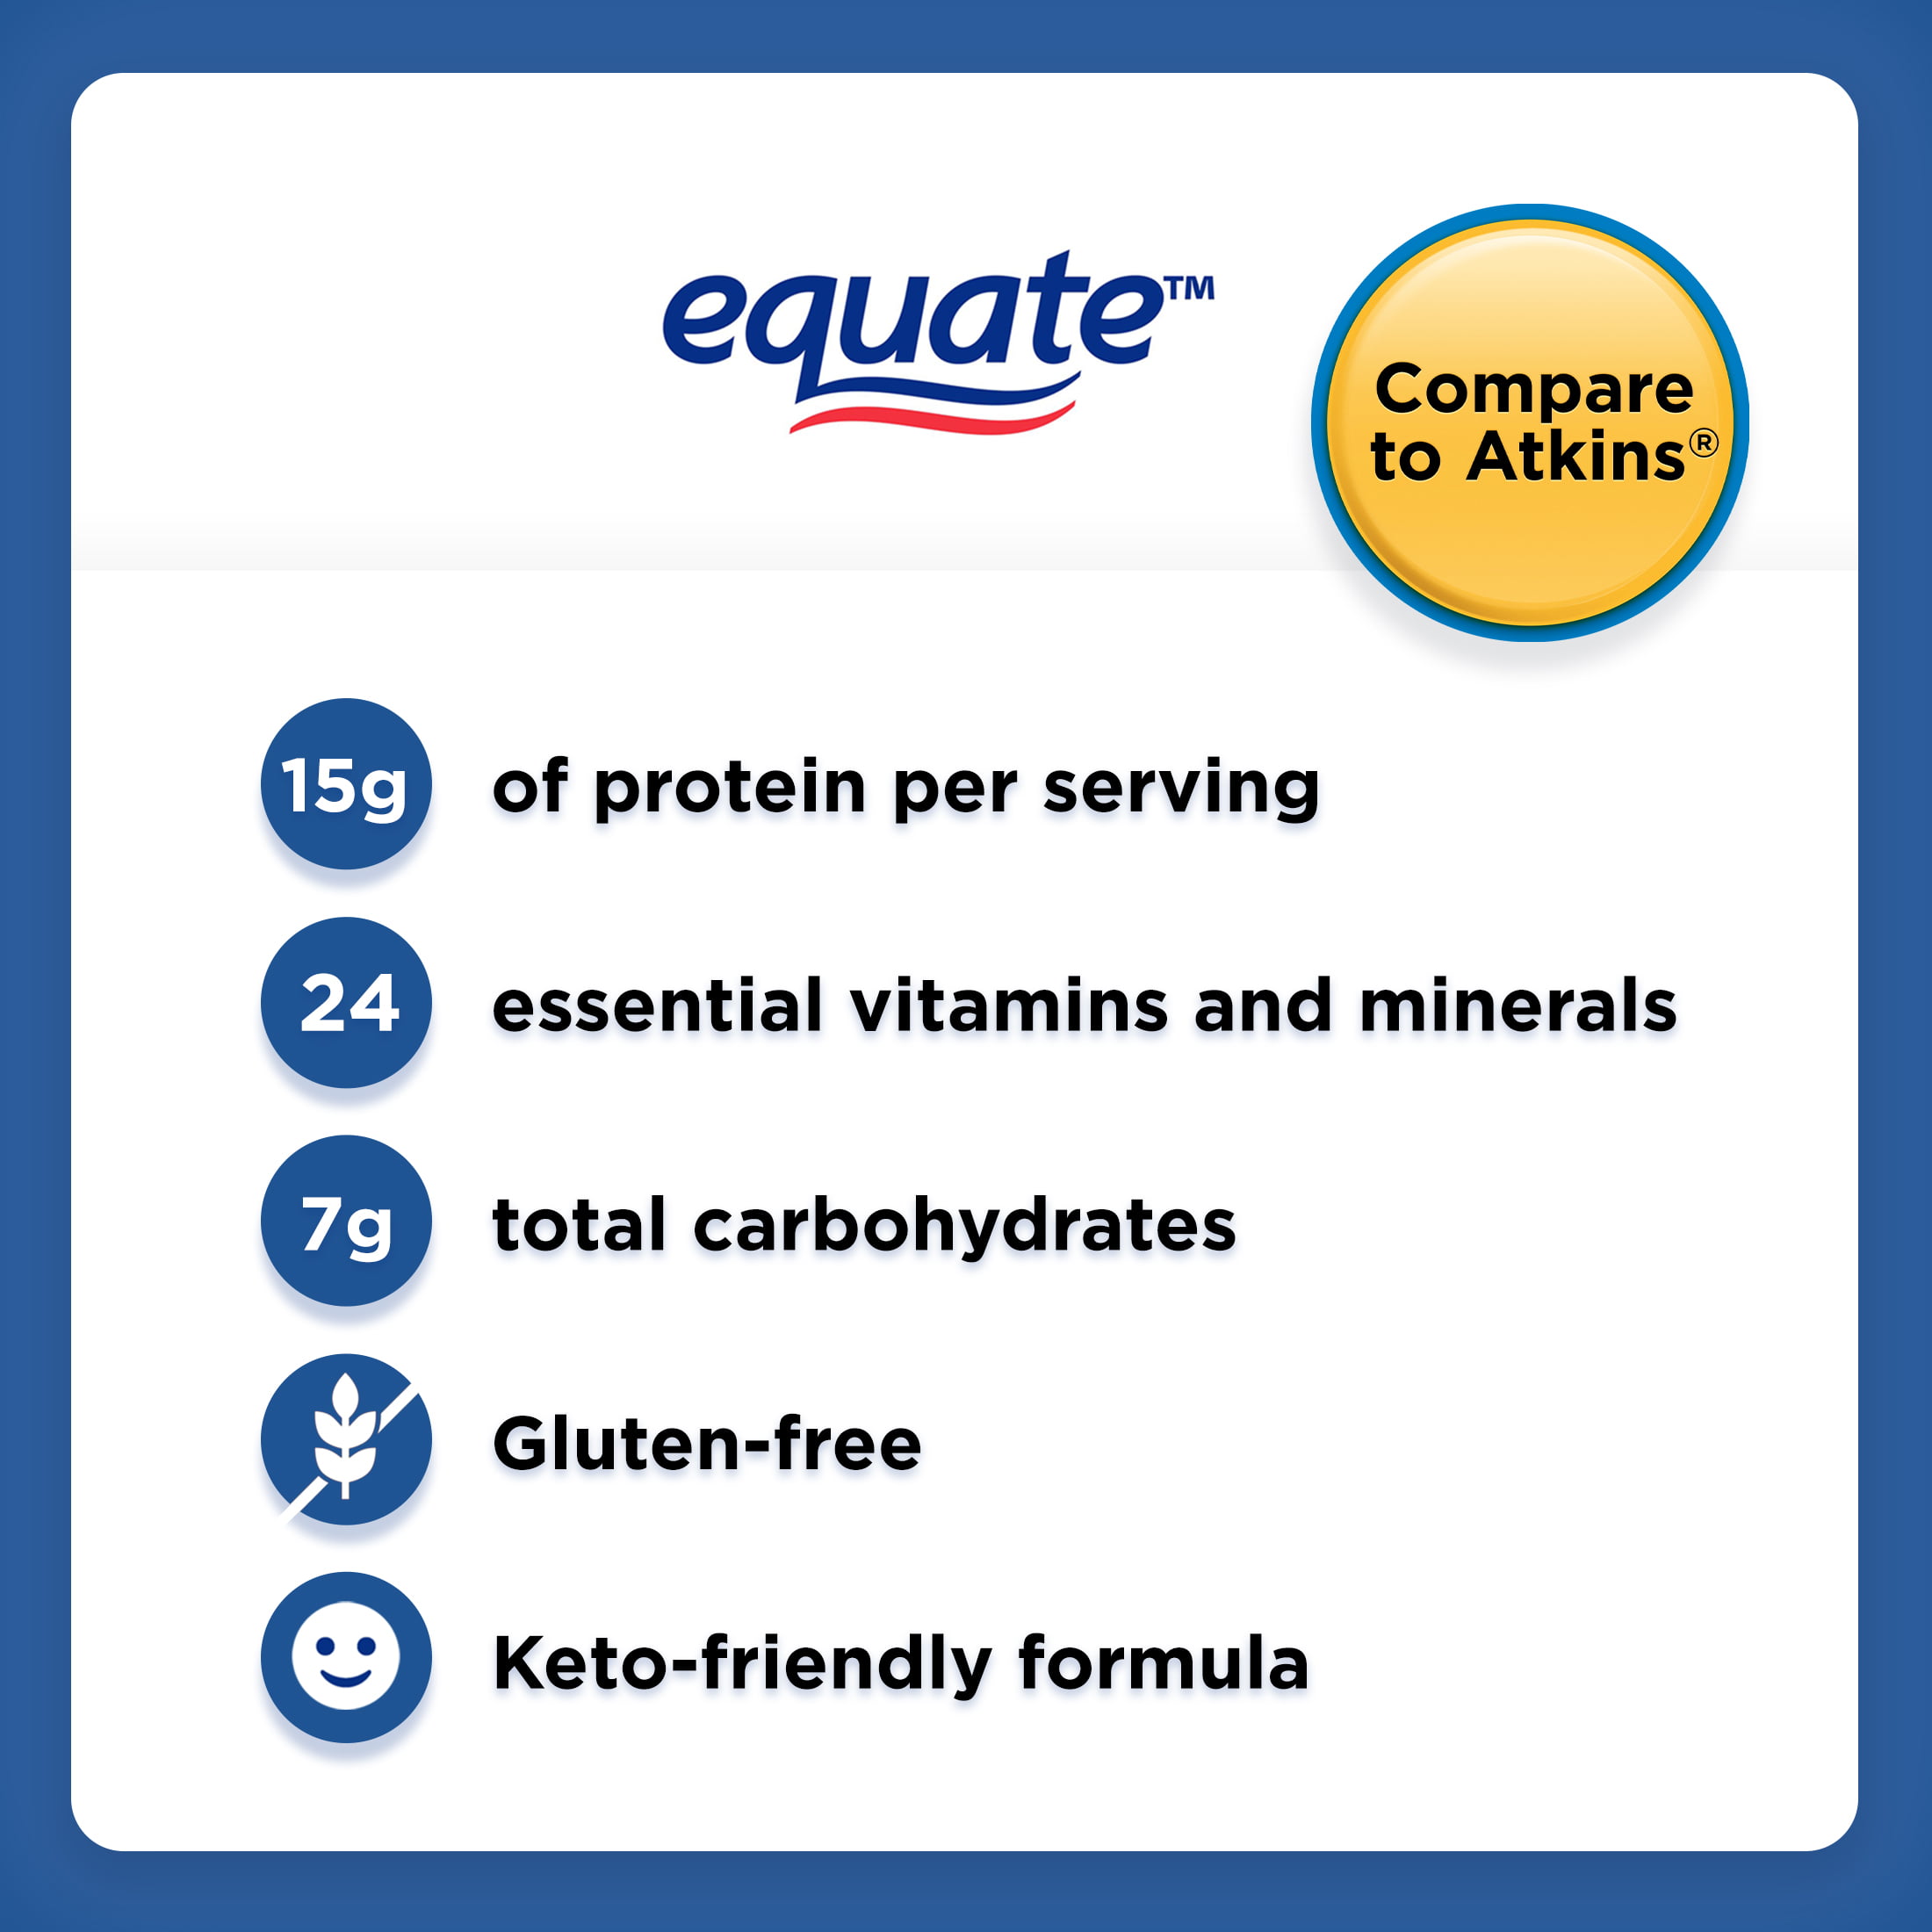 Equate Meal Replacement Shake, Strawberries & Cream, 11 fl oz, 6 Count